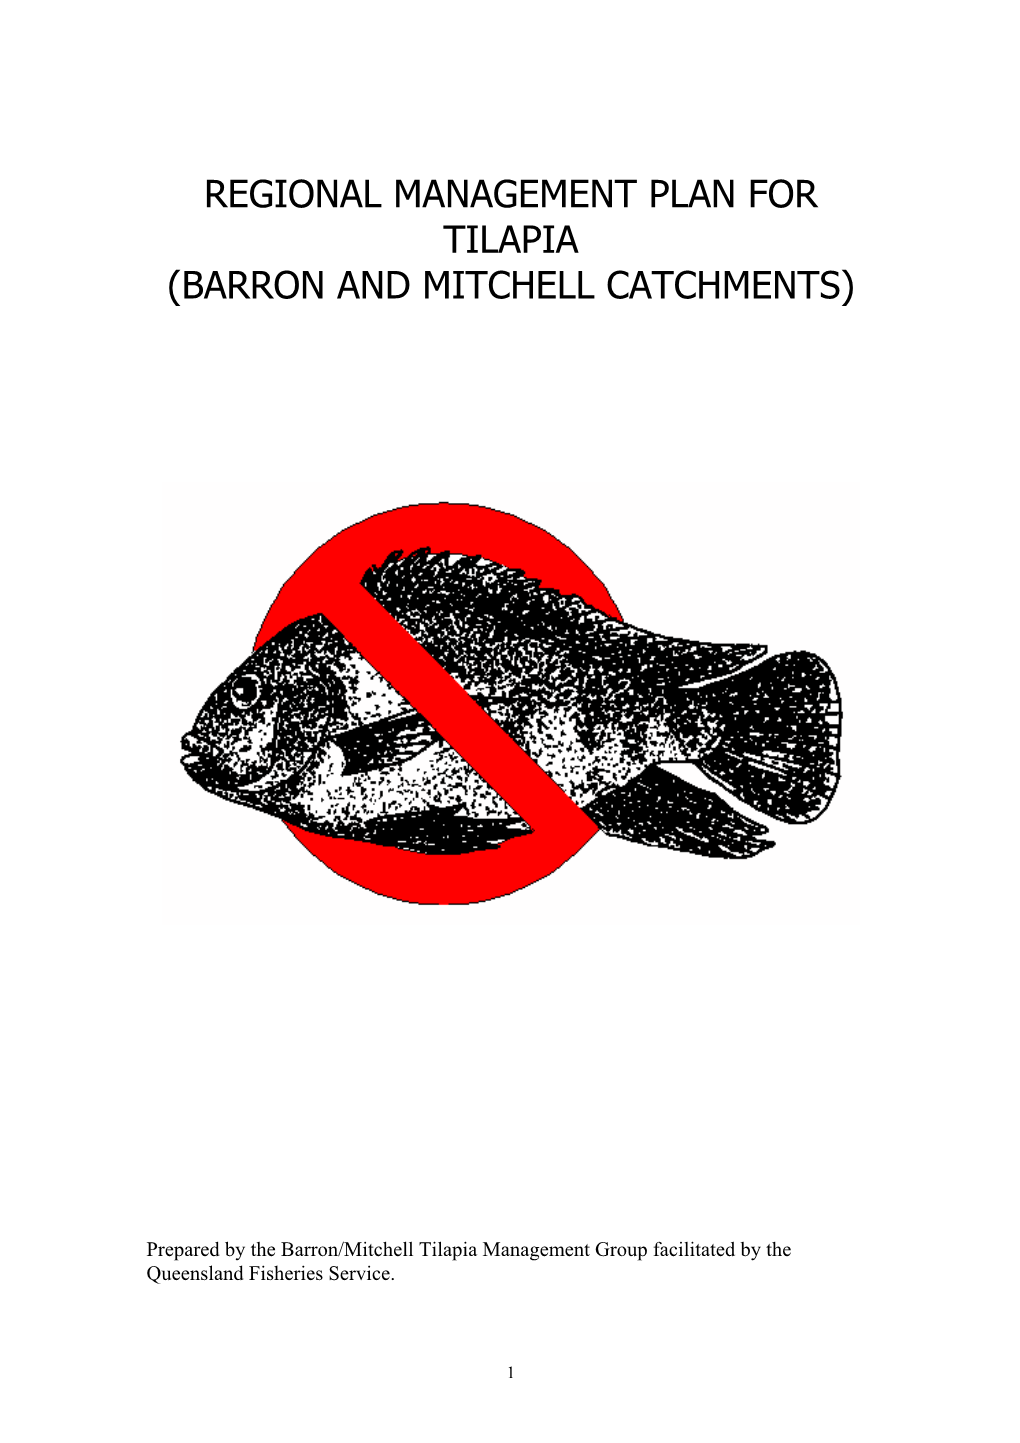 Regional Management Plan for Tilapia (Barron and Mitchell Catchments)